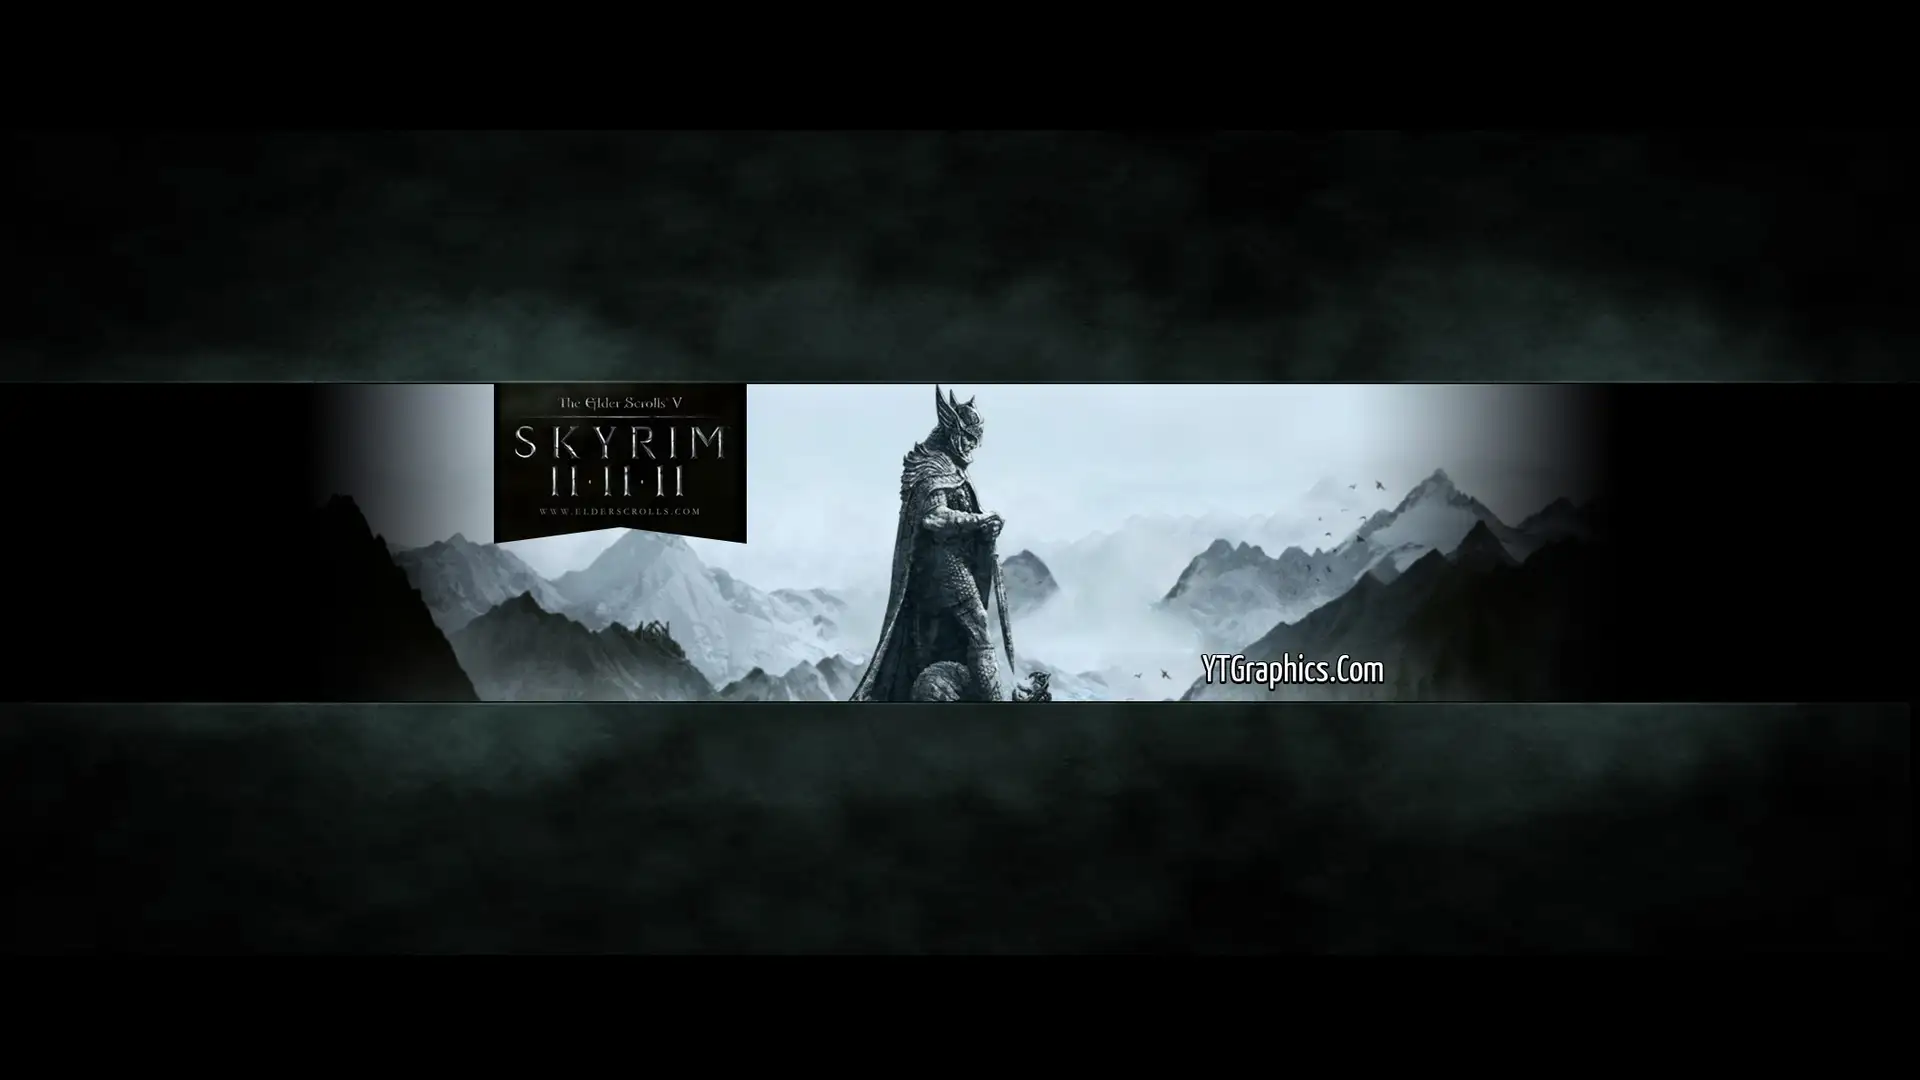 Another Skyrim Banner